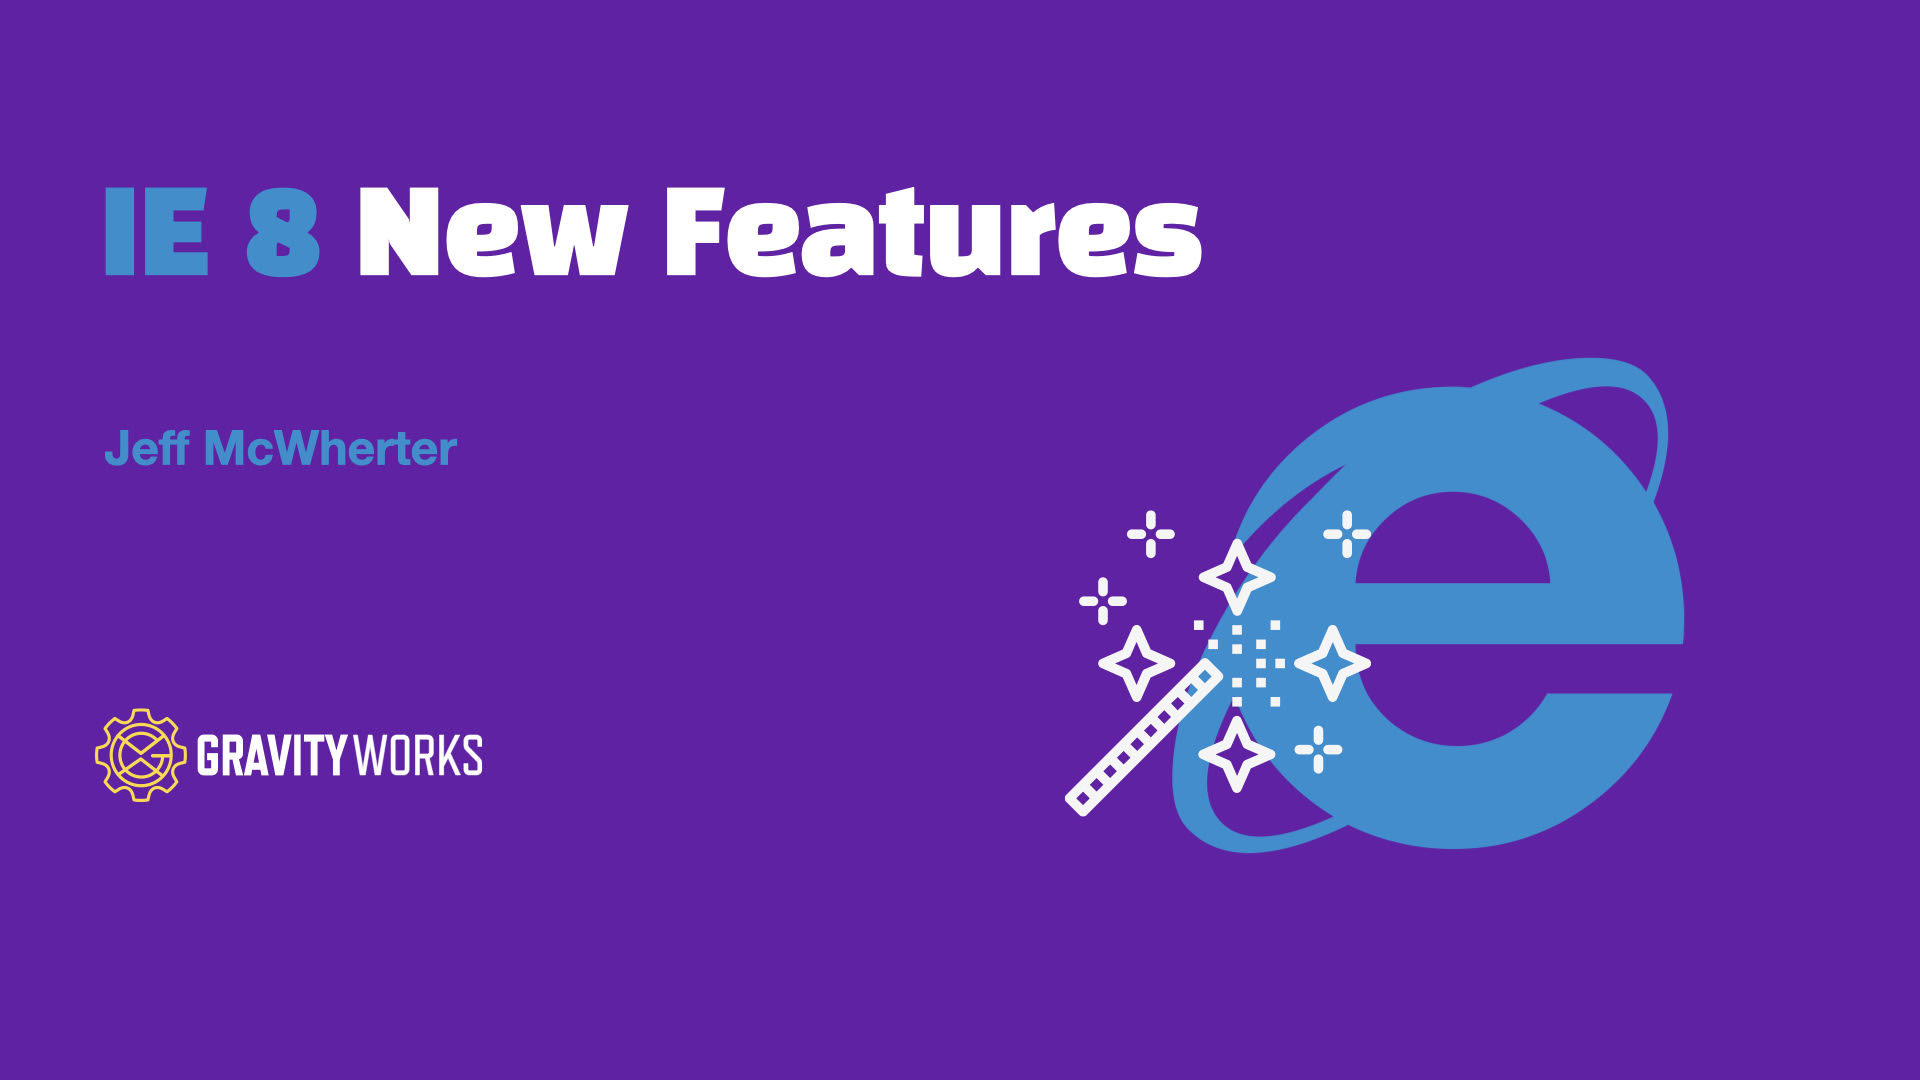 IE 8 New Features